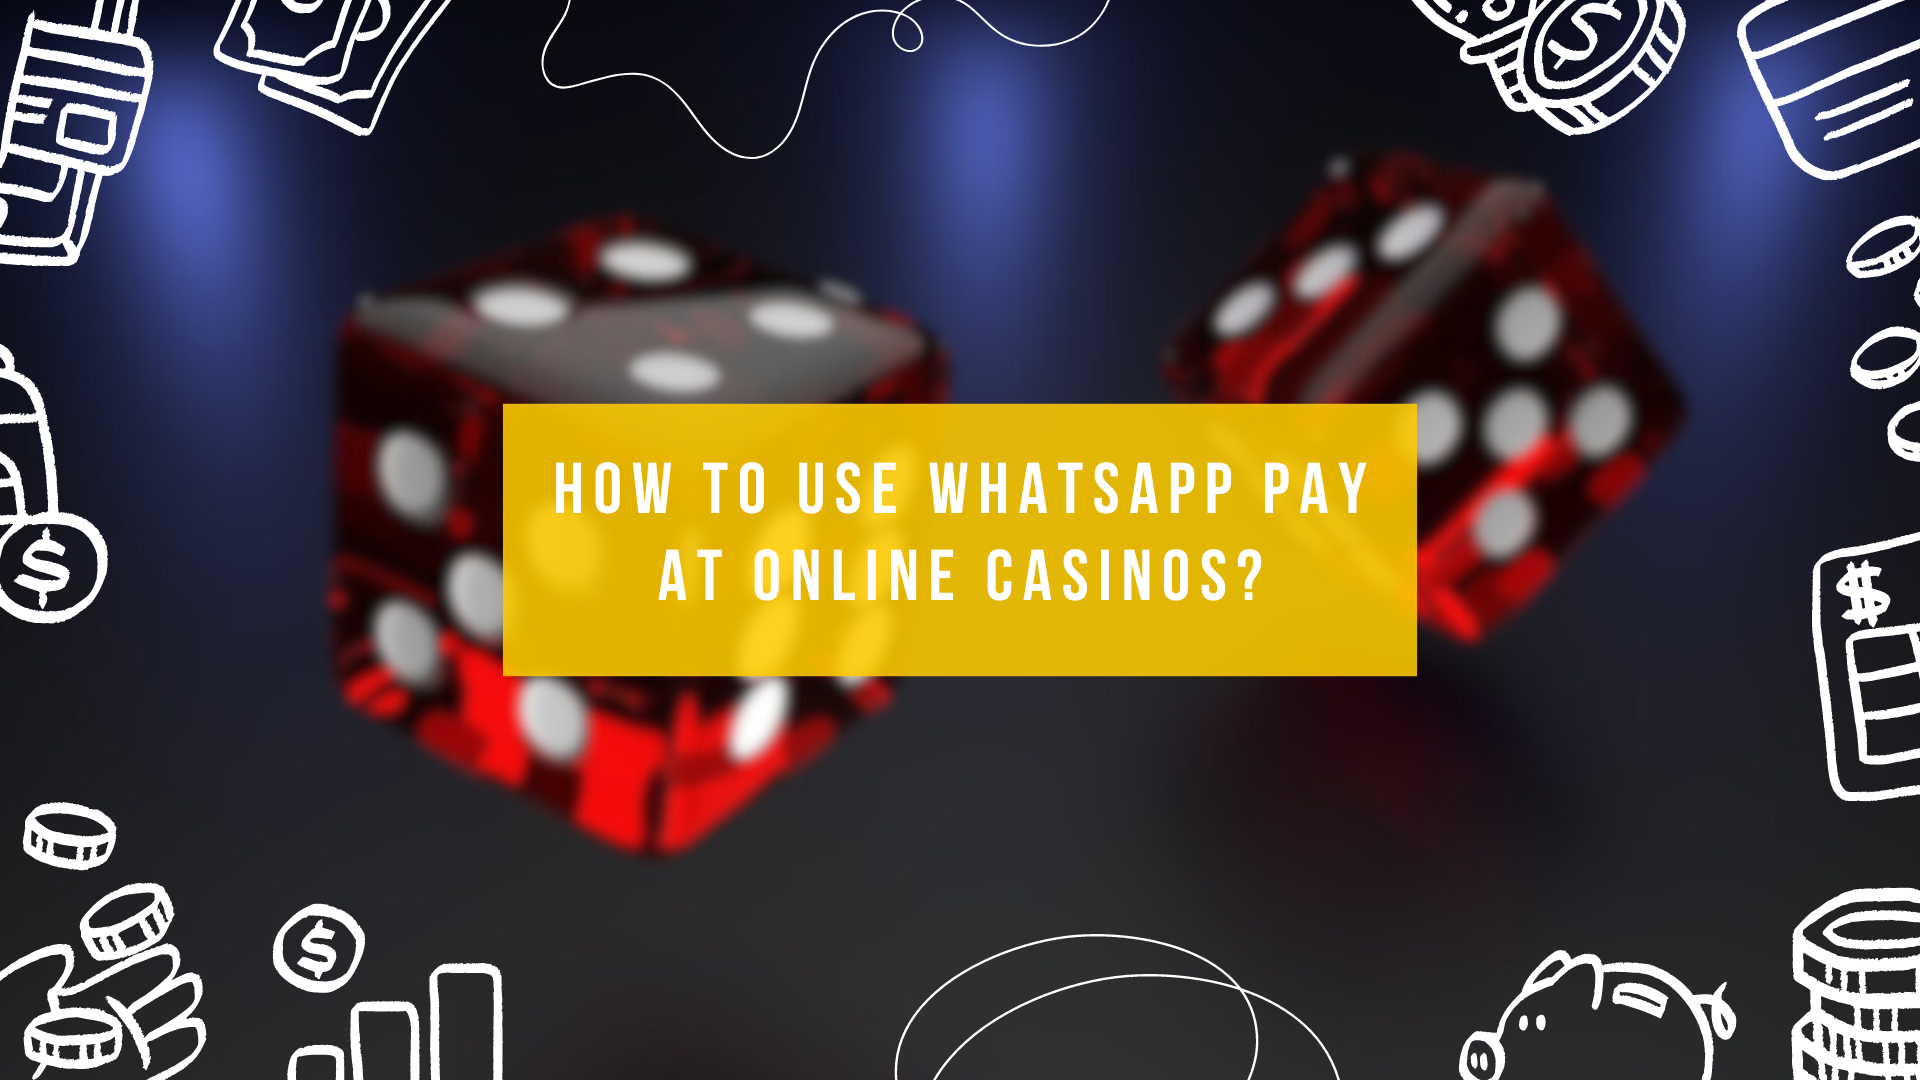 How to Use WhatsApp Pay at Online Casinos?